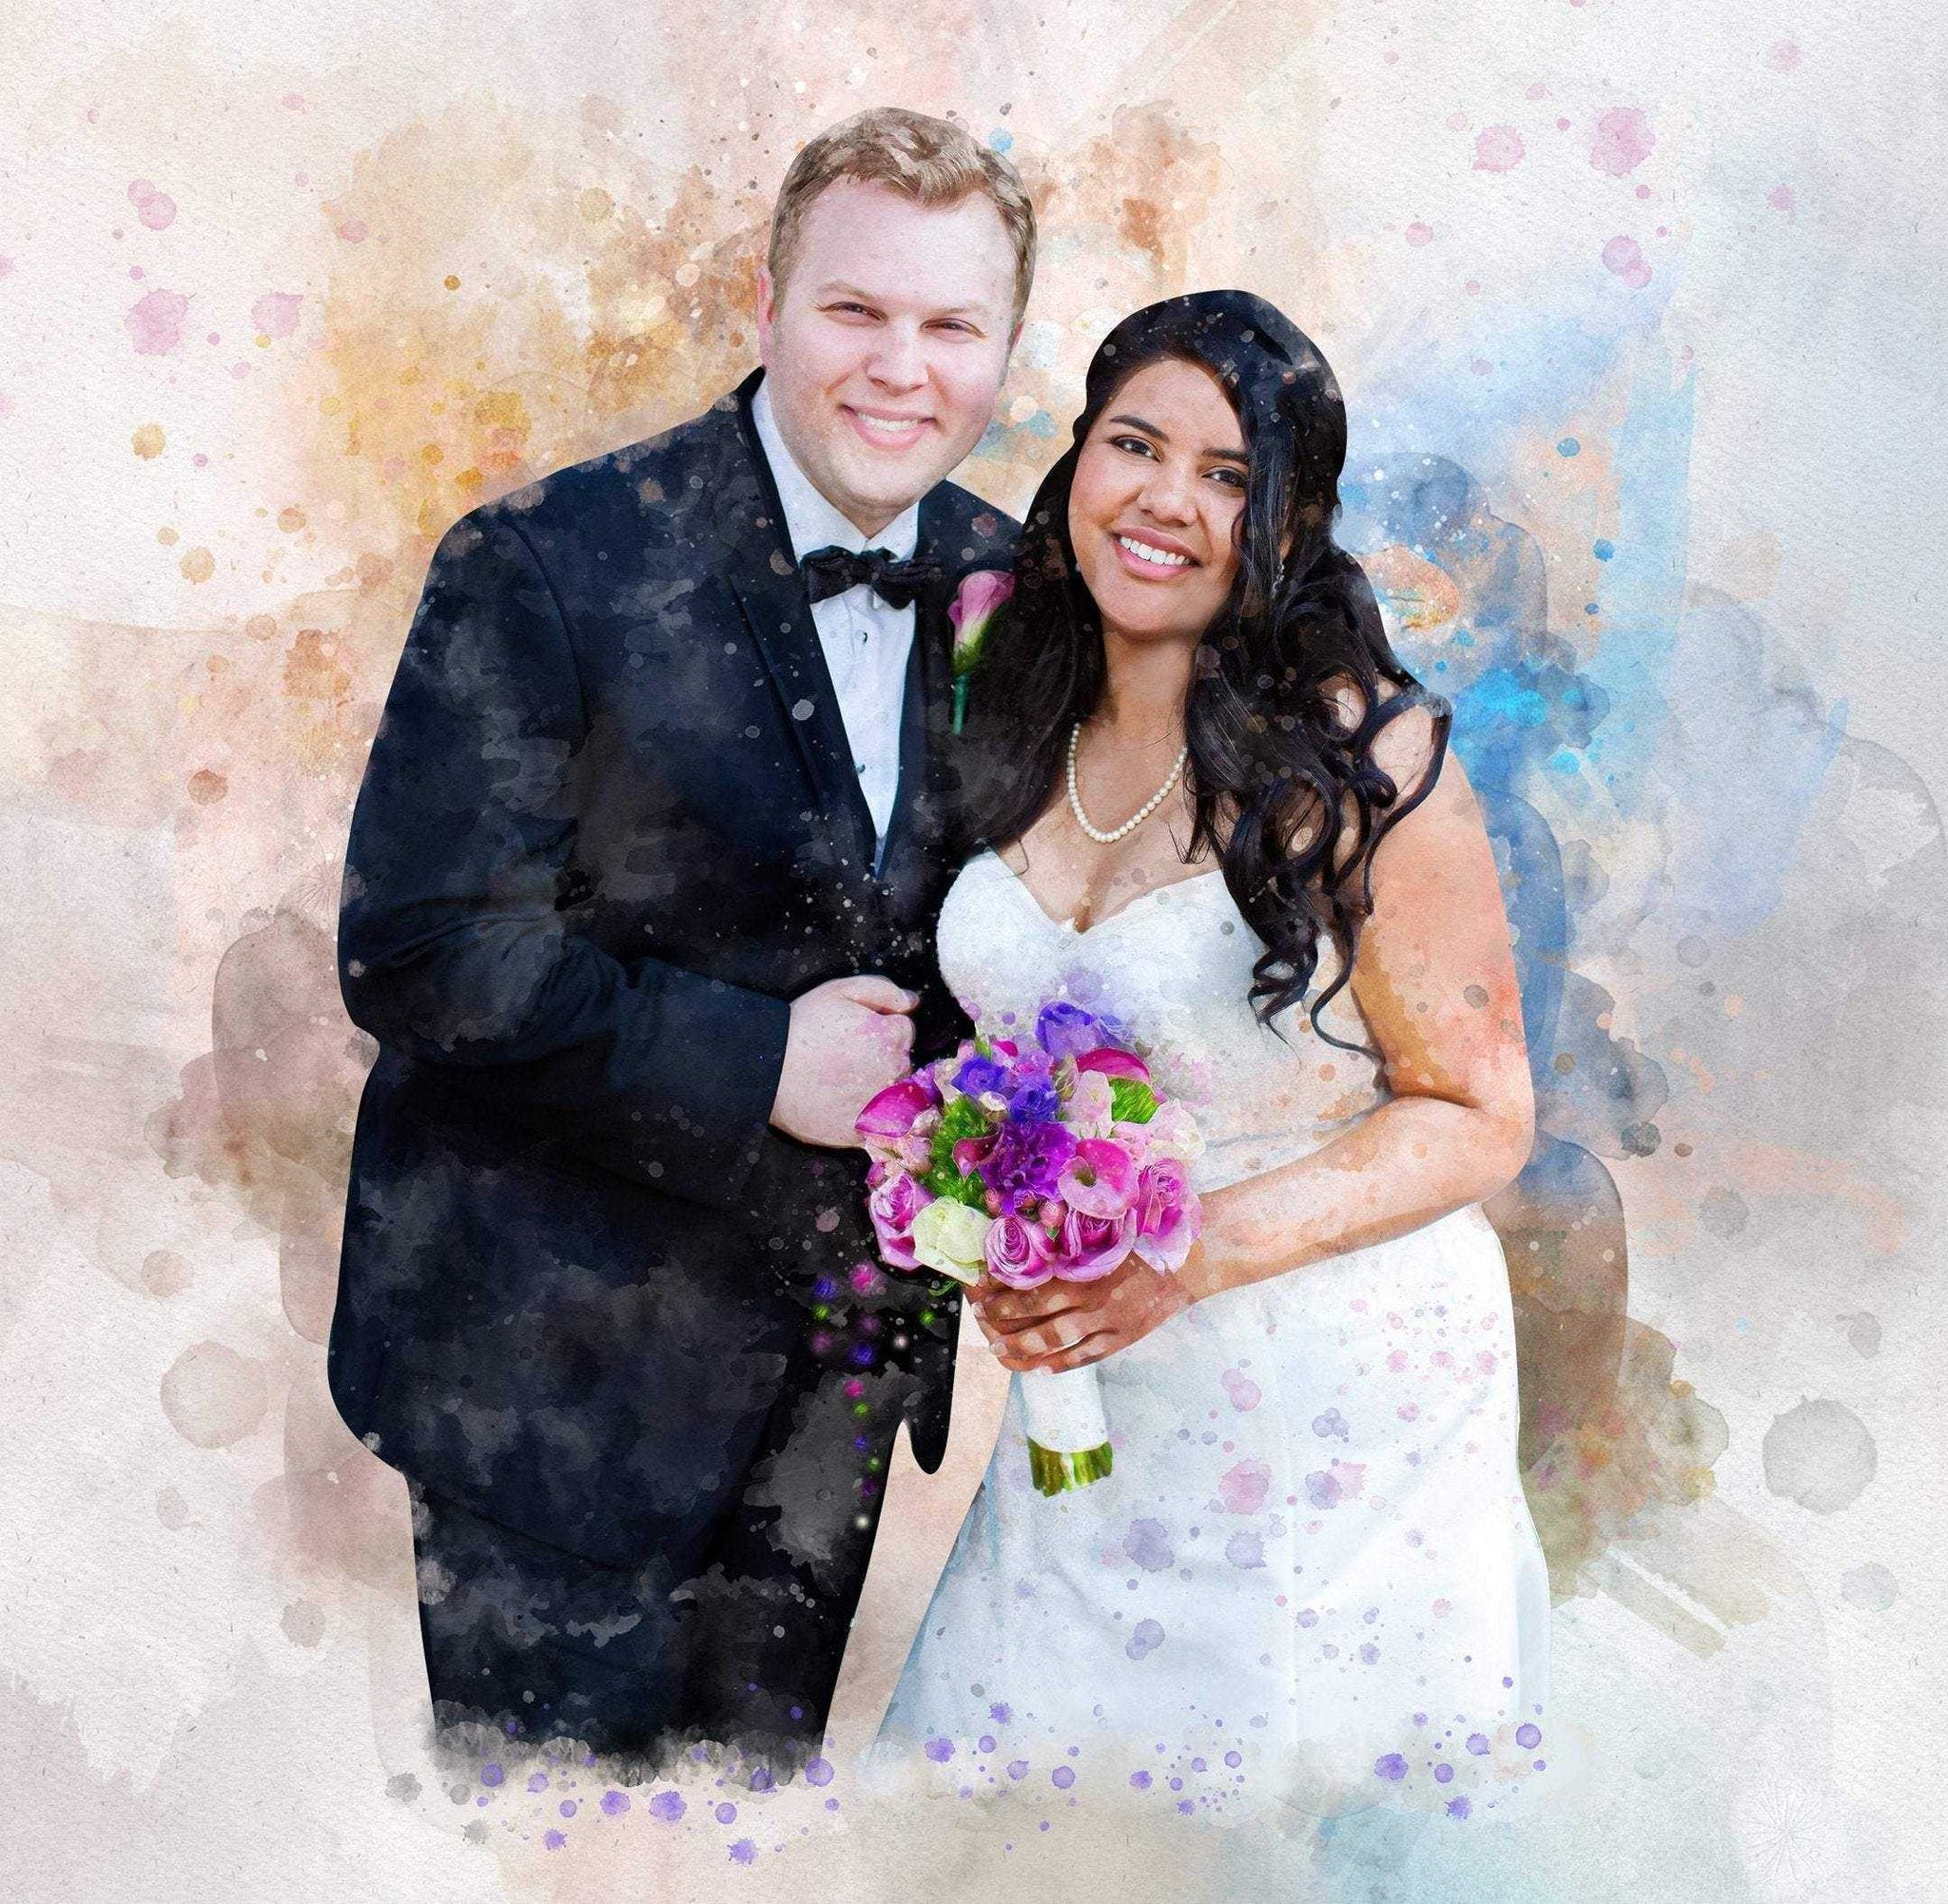 Art from Photo, Personalized Wedding Gifts, Wedding Gift Ideas, Personalized Picture Gifts - FromPicToArt